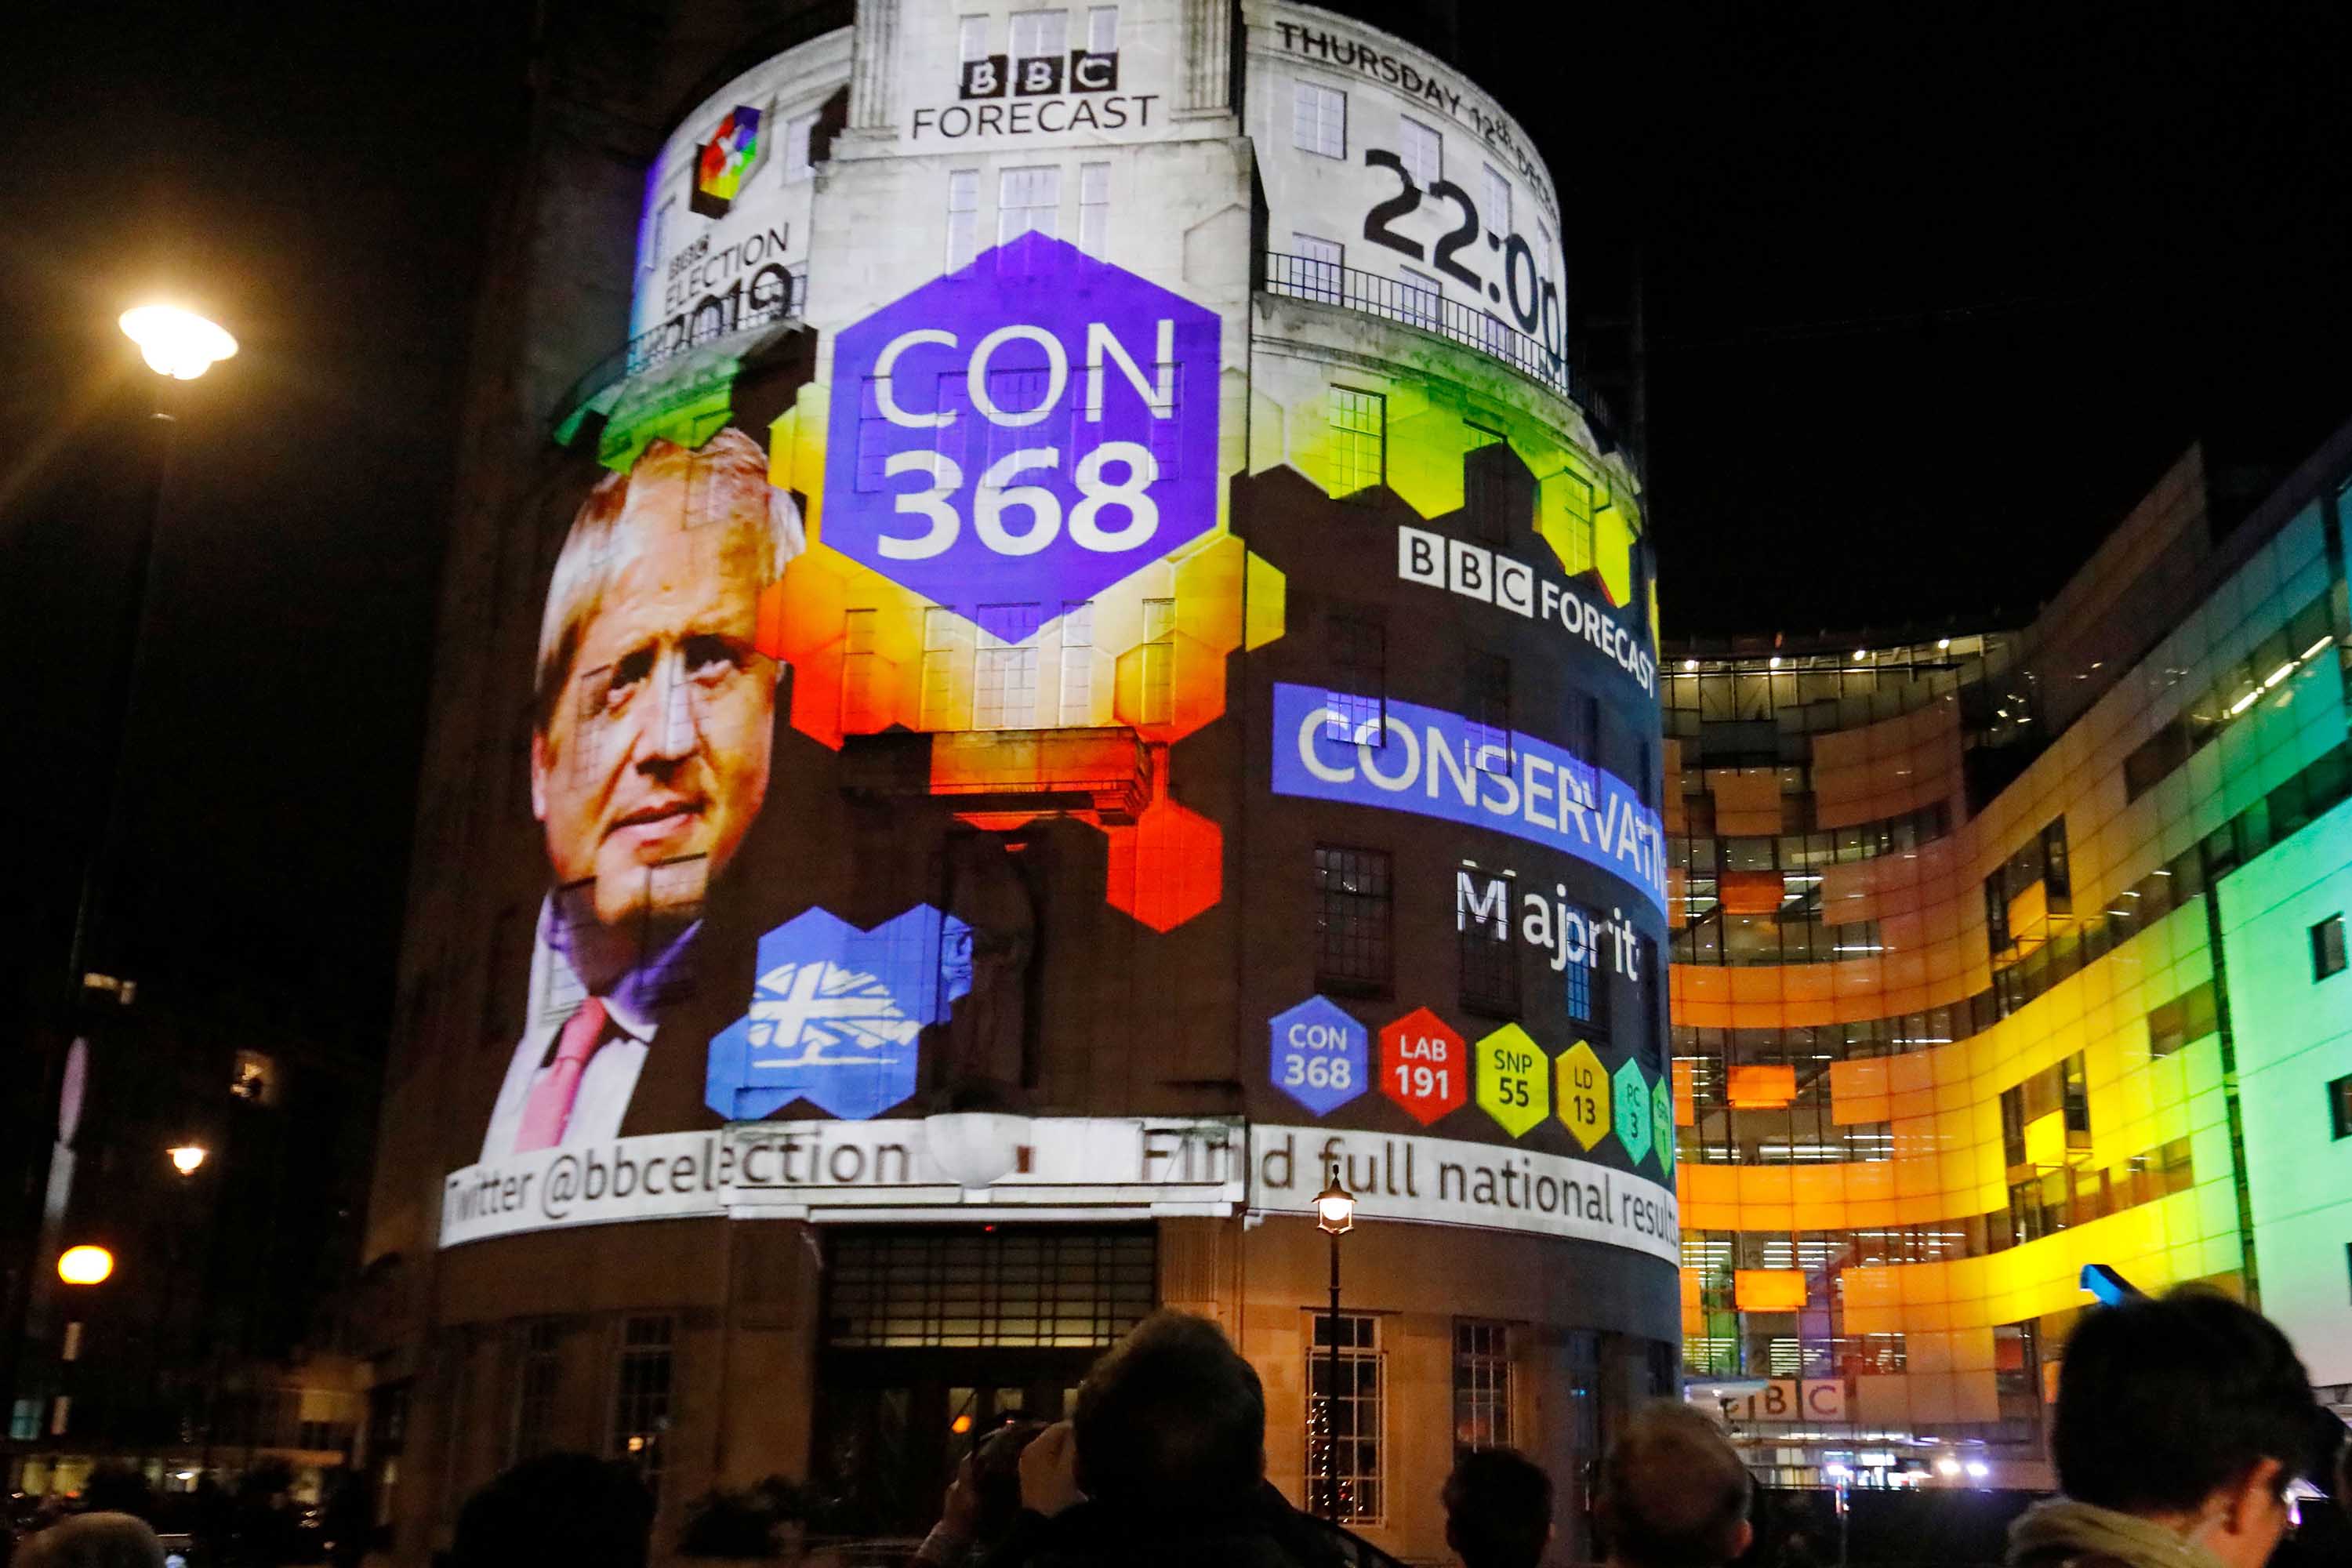 The BBC exit poll results are projected on the outside of the BBC building in London, showing Prime Minister Boris Johnson's Conservative Party winning the election with 368 seats. Photo: Tolga Akmen/AFP via Getty Images